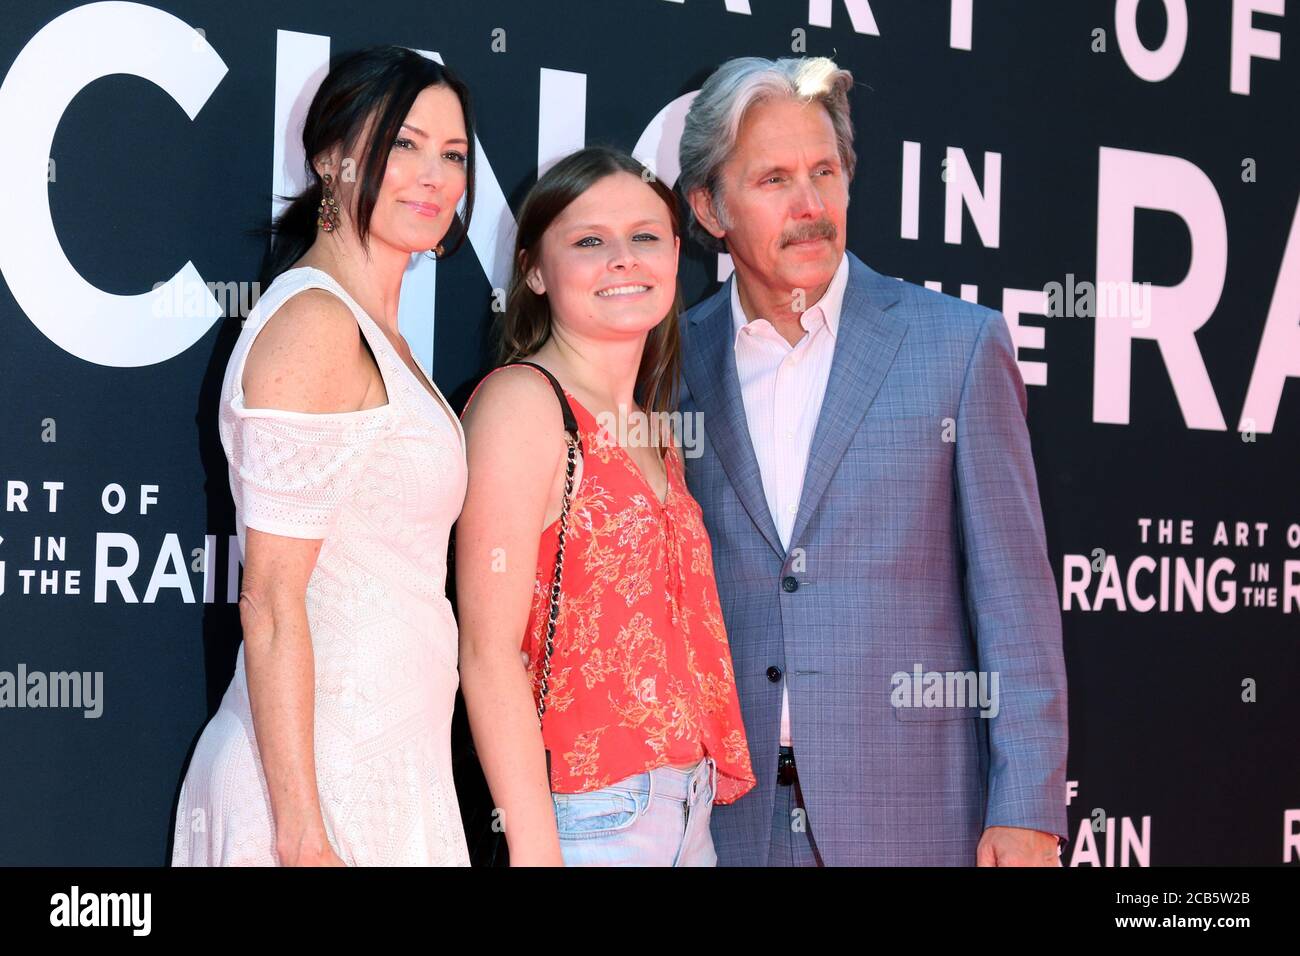 LOS ANGELES - AUG 1:  Guest, Mary Cole, Gary Cole at the 'The Art of Racing in the Rain' World Premiere at the El Capitan Theater on August 1, 2019 in Los Angeles, CA Stock Photo